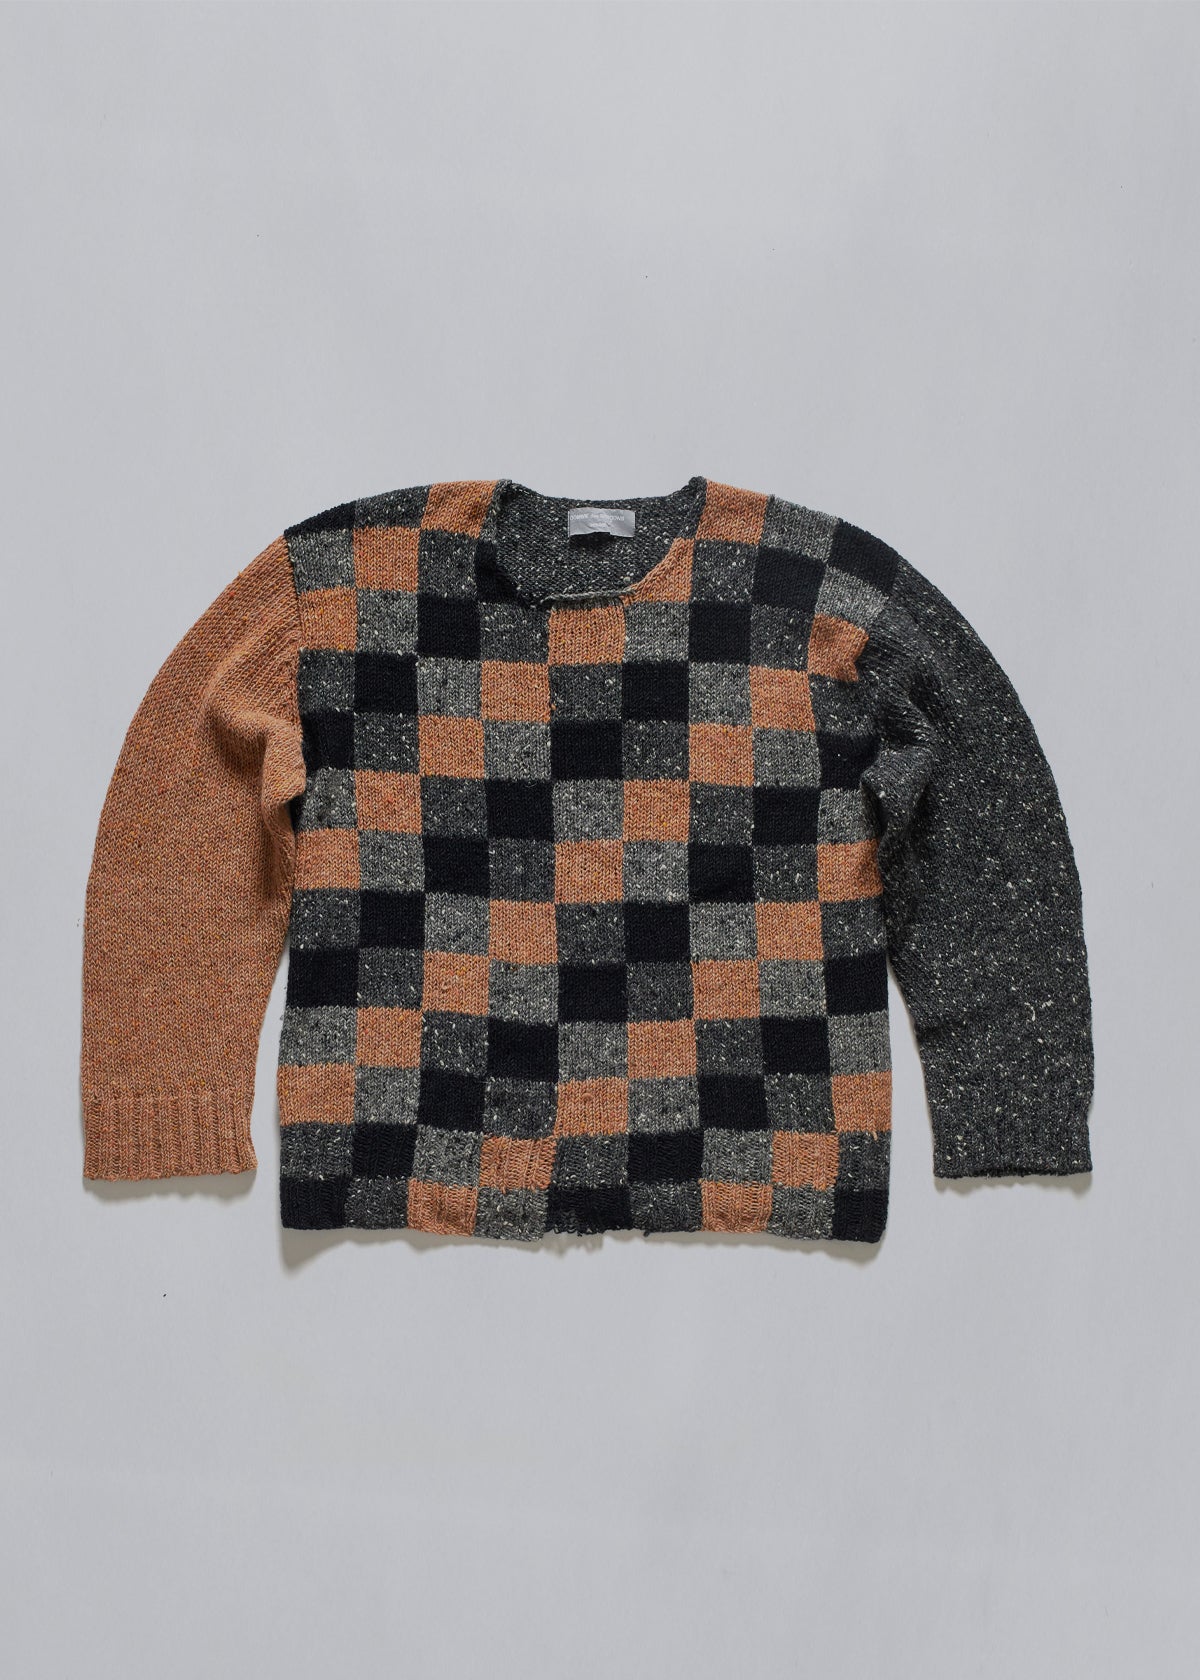 Homme Multi Pattern Knit 1997 - Large - The Archivist Store